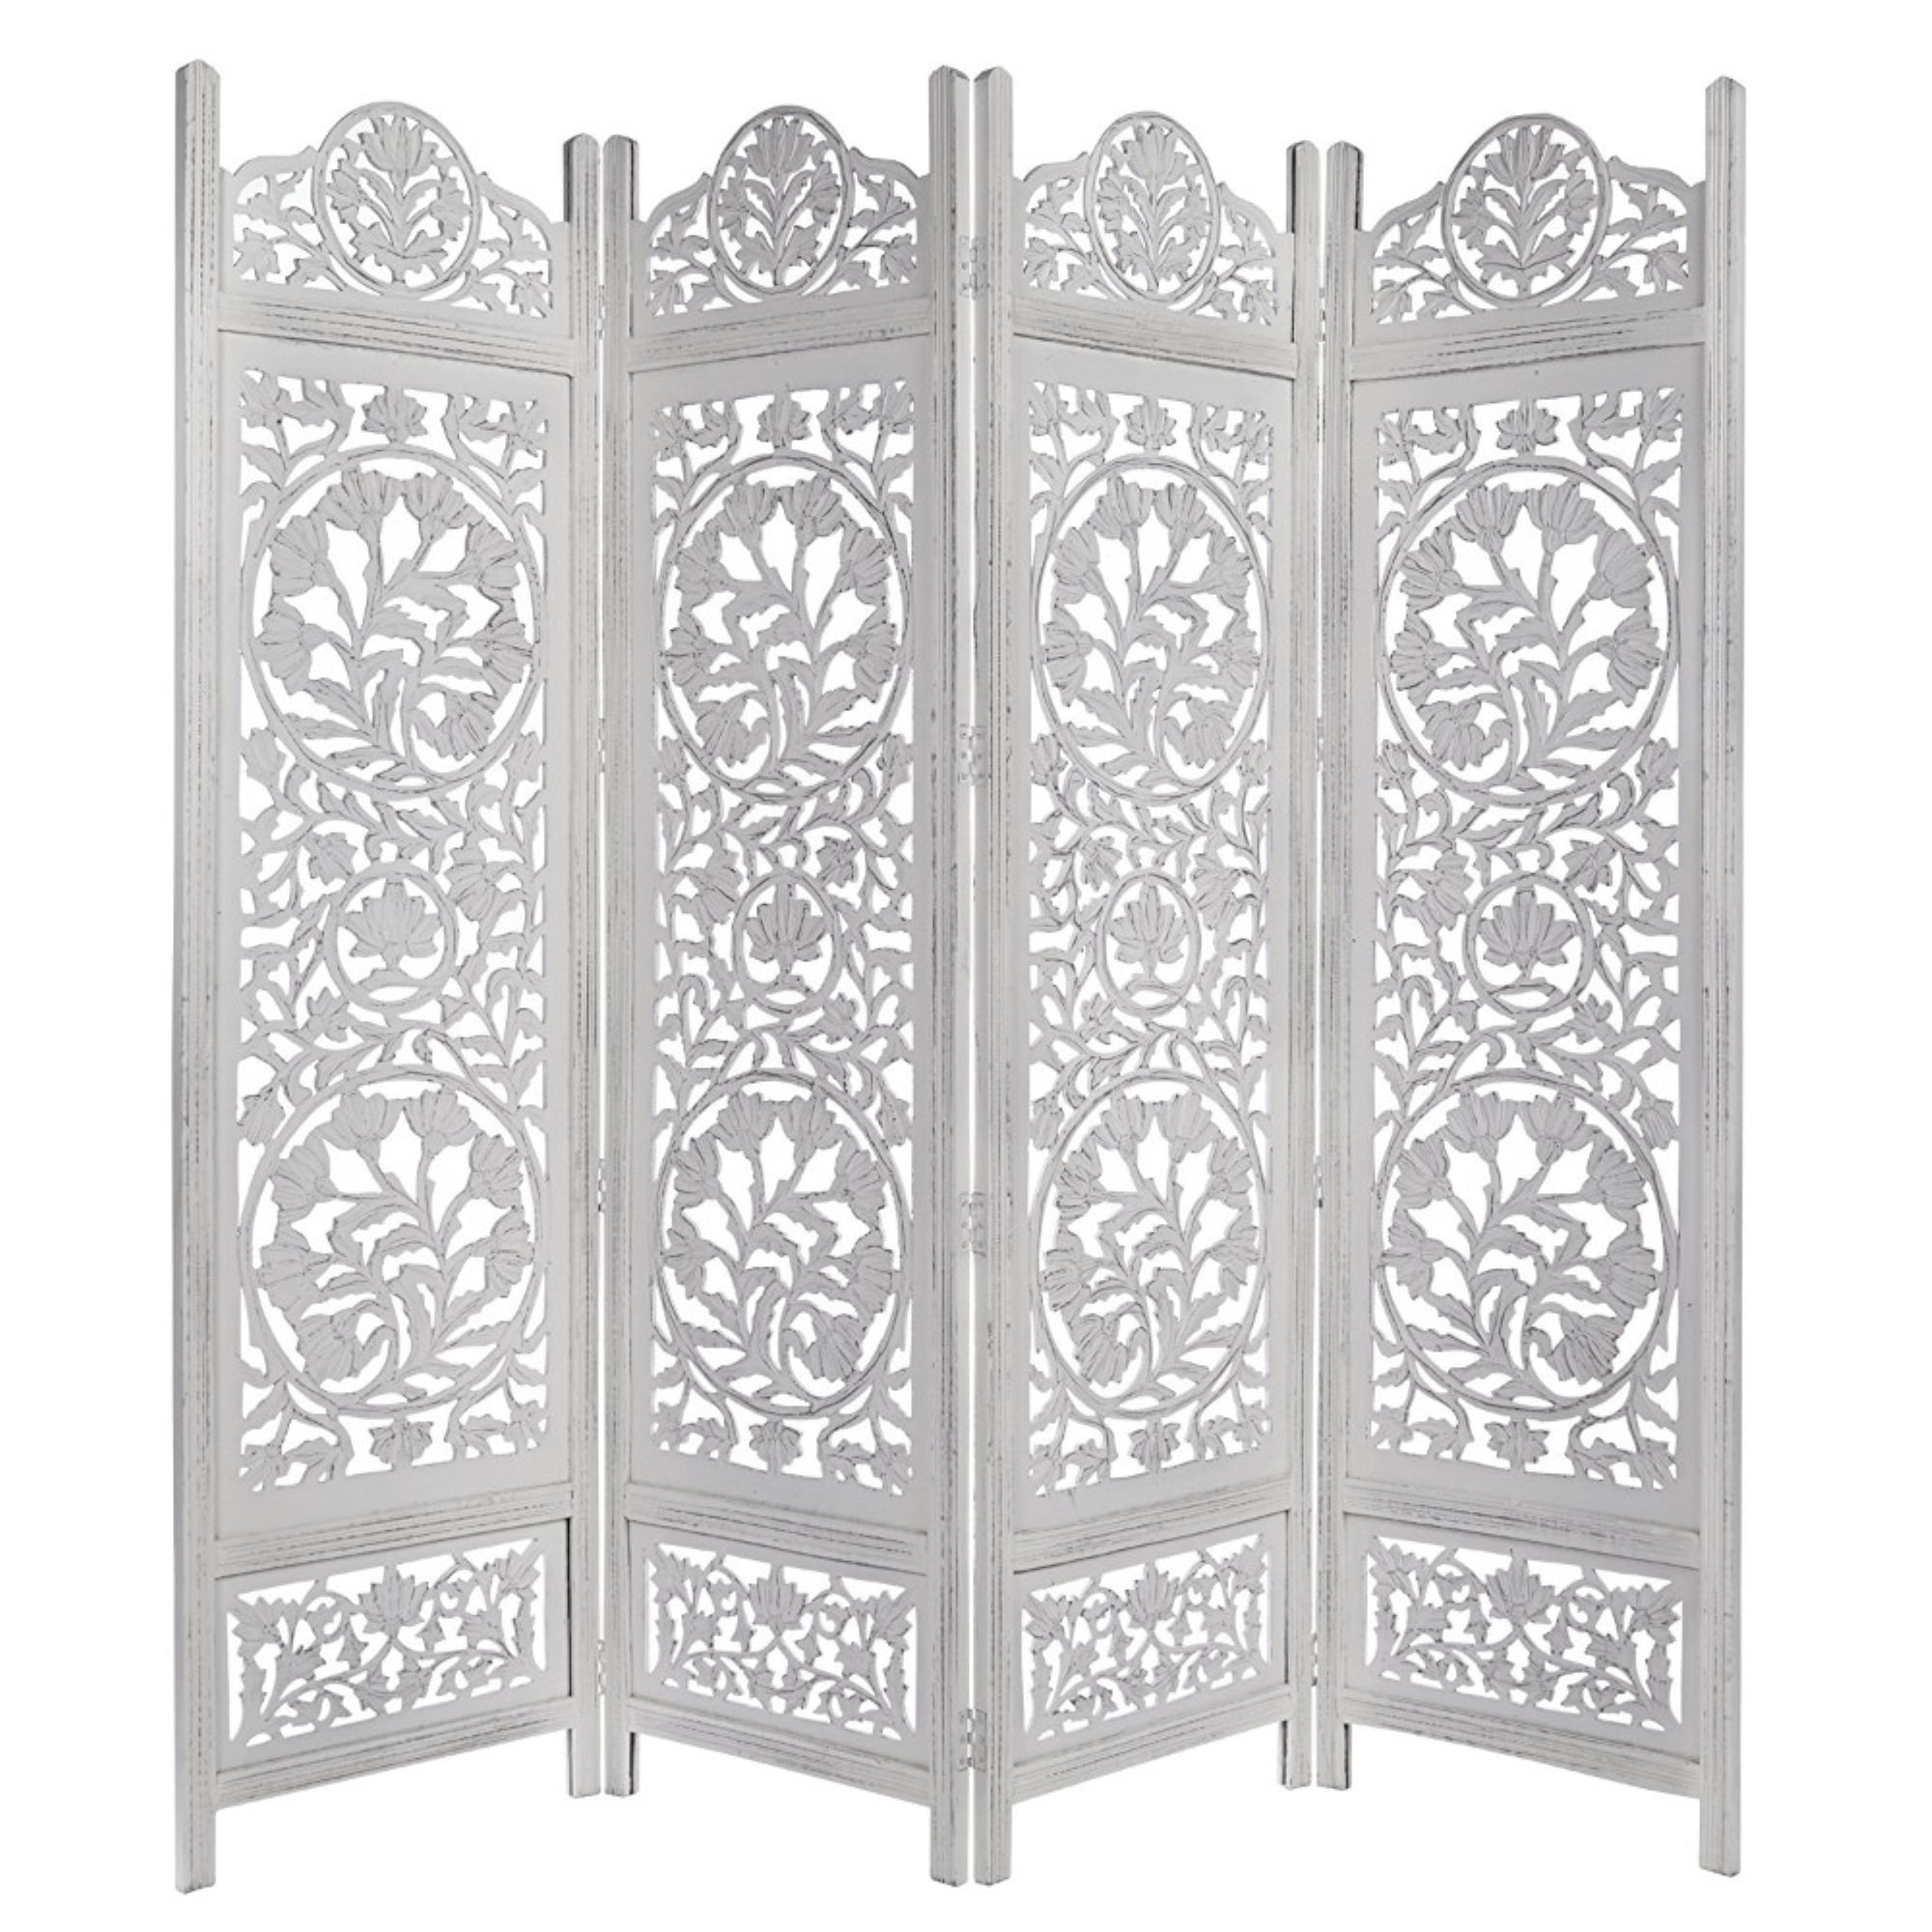 Home Decor Total Privacy Room Divider Chinese Style Lotus Partition Curtain 